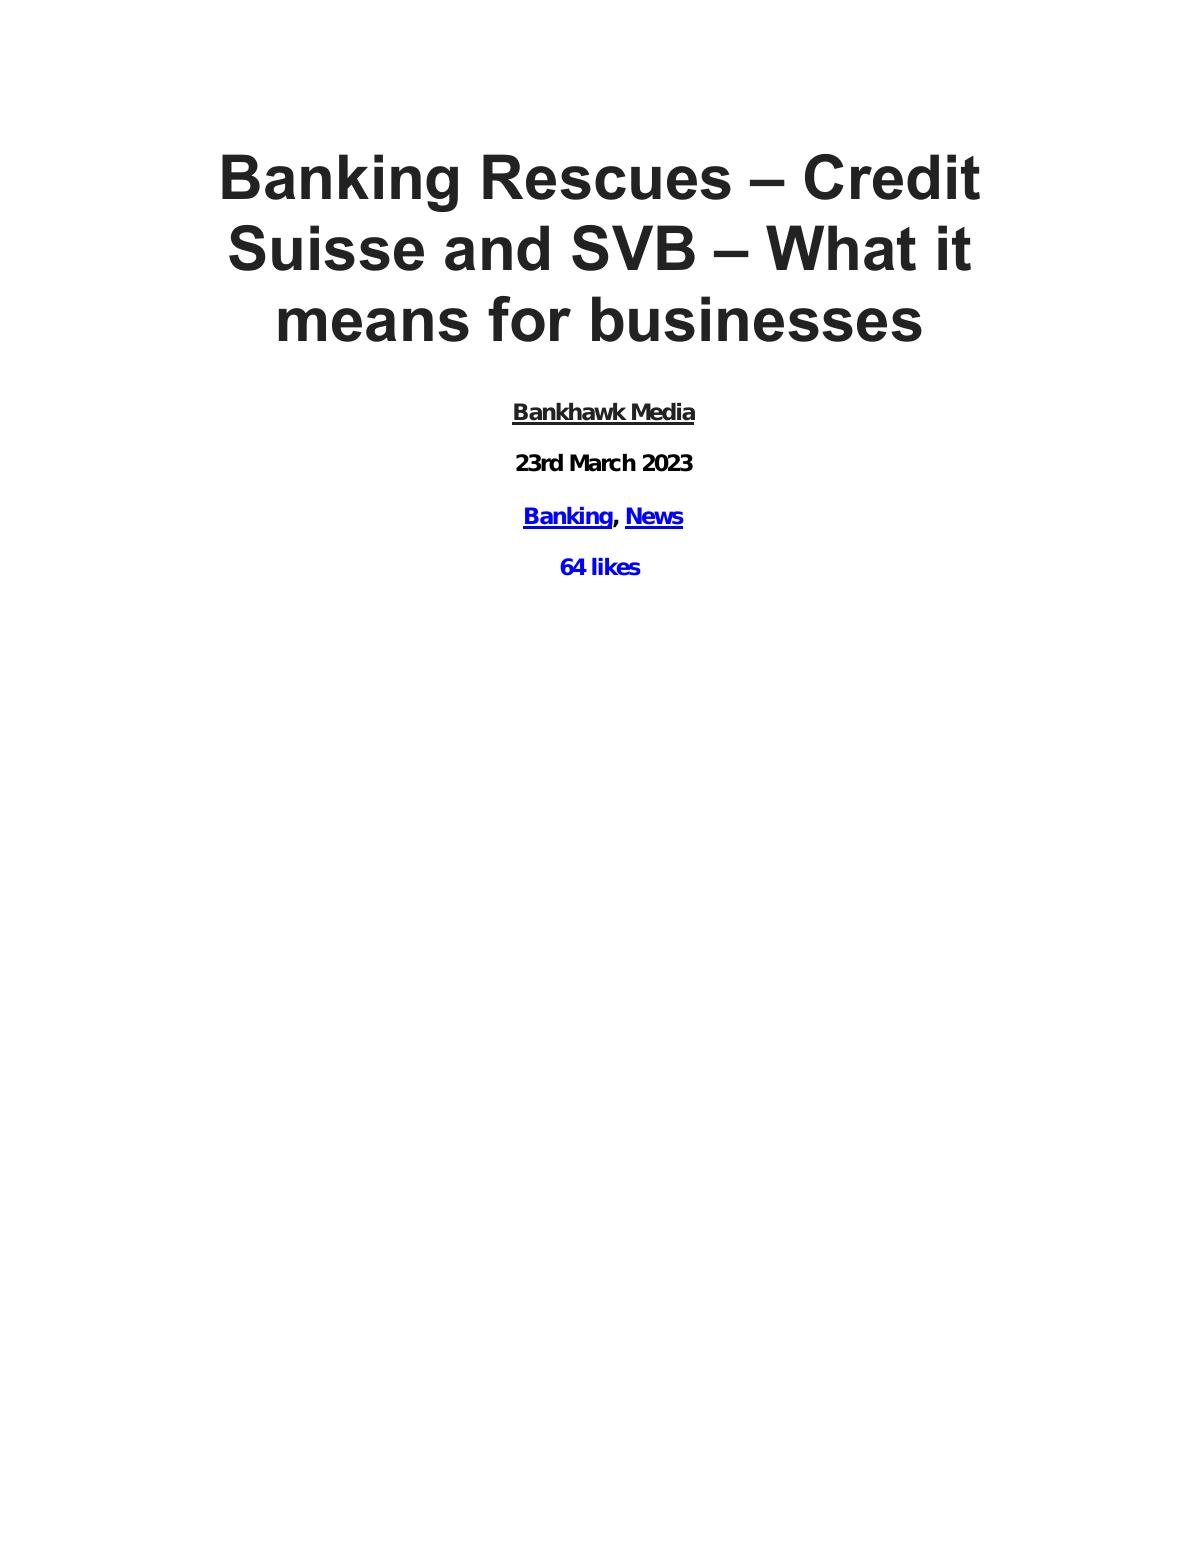 Banking Rescues - Credit Suisse and SVB - What it means for businesses